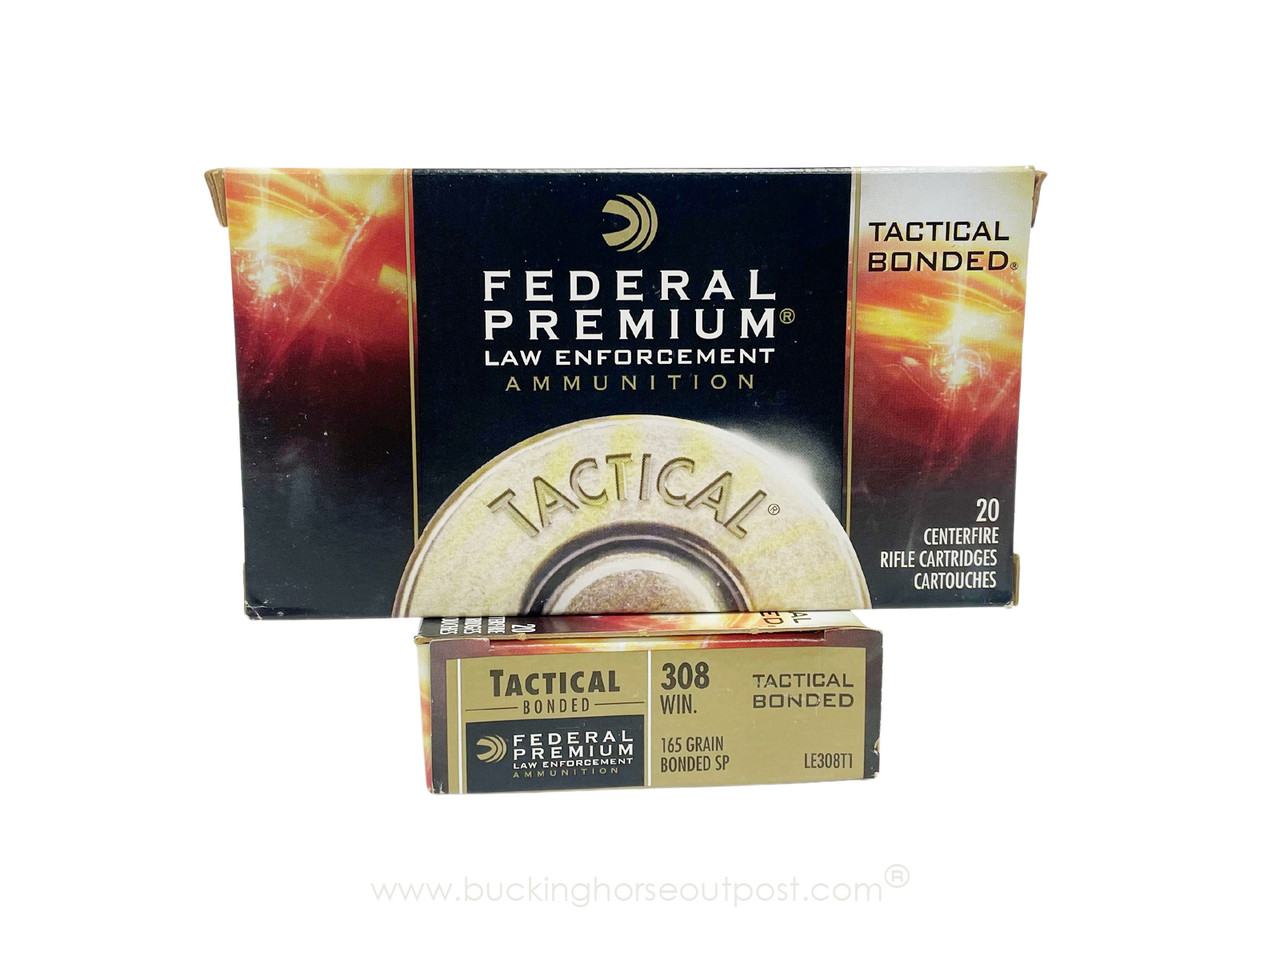 Federal Premium LE Tactical Bonded .308 Winchester 165 Grain Bonded Soft-Point 20rds Per Box (LE308T1) - Police Trade In - FREE SHIPPING ON ORDERS OVER $175